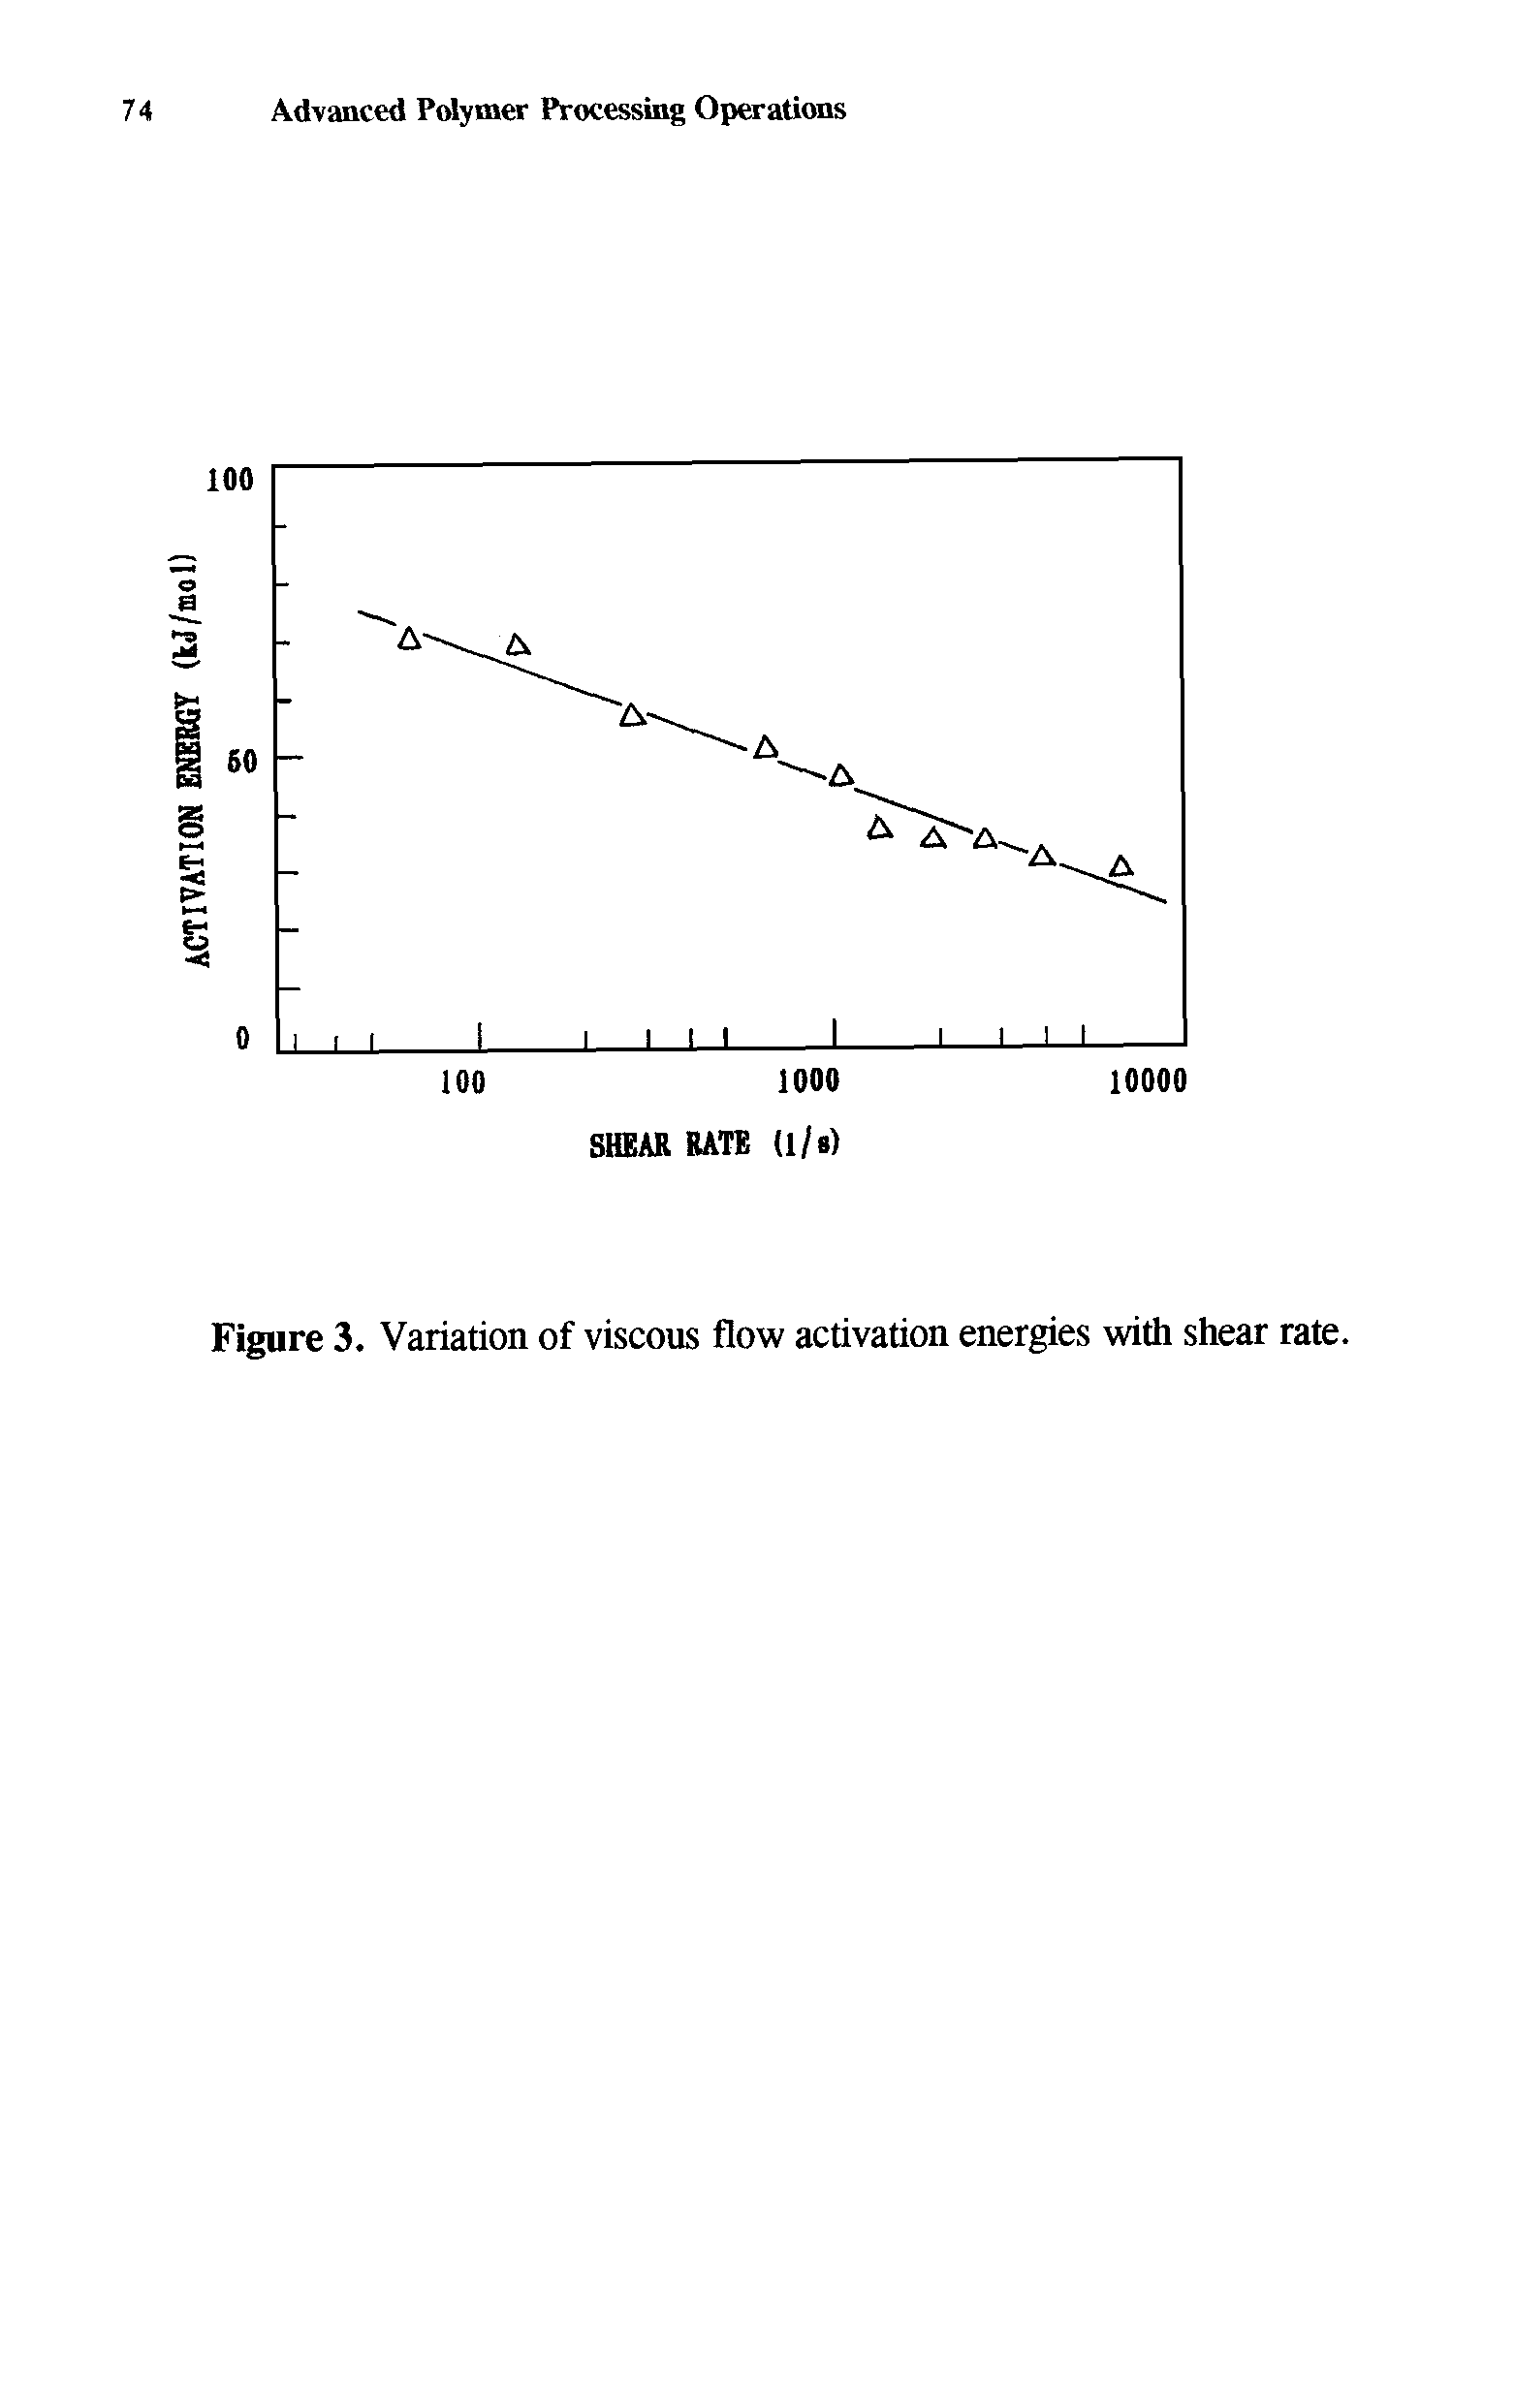 Figure 3. Variation of viscous flow activation energies with shear rate.